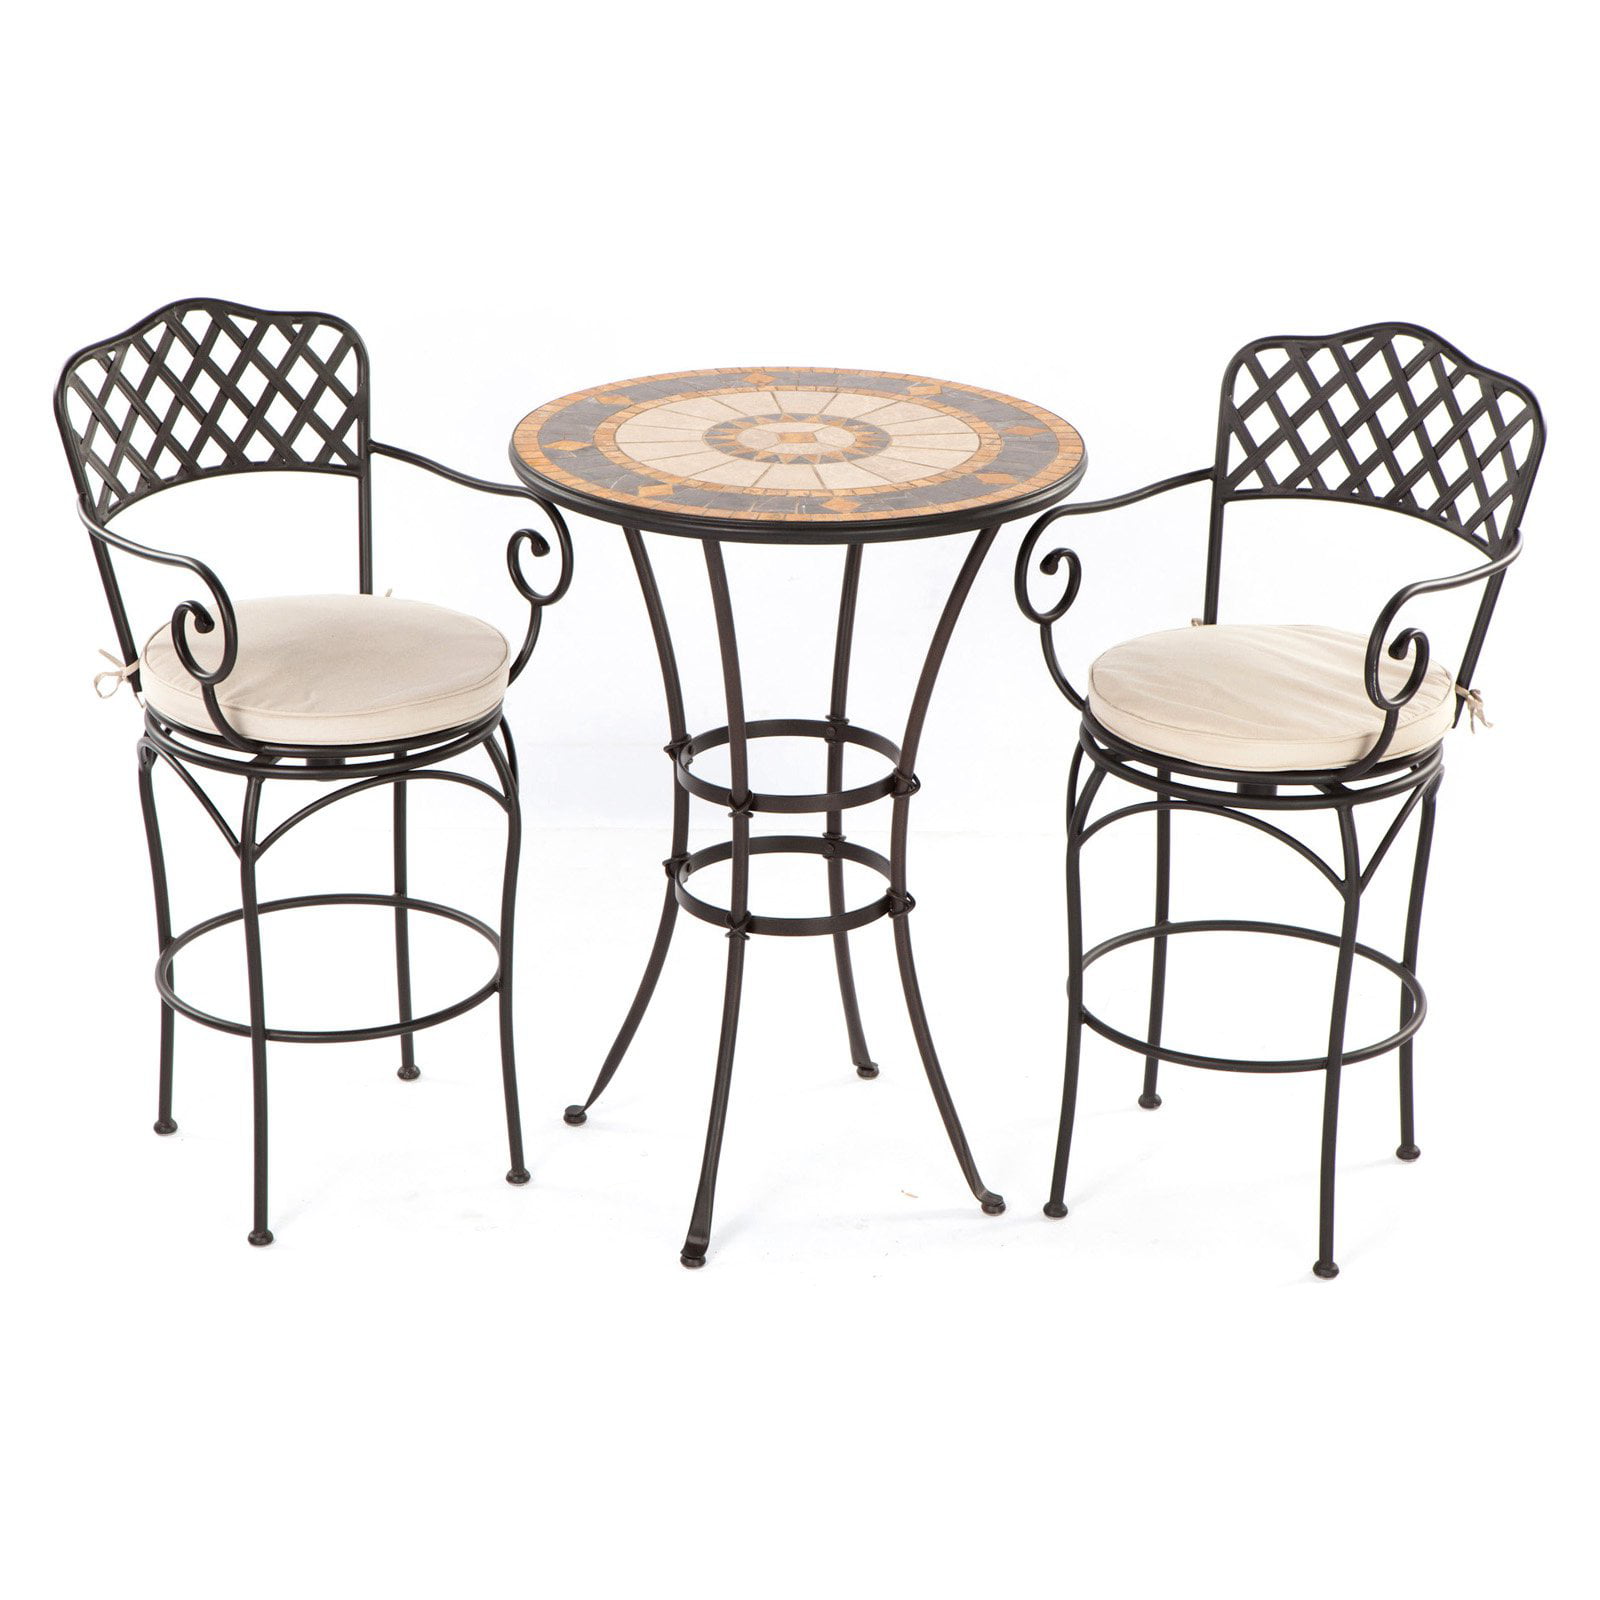 Compass Mosaic Bar Height Bistro Set, Bar Height Outdoor Dining Table And Chairs